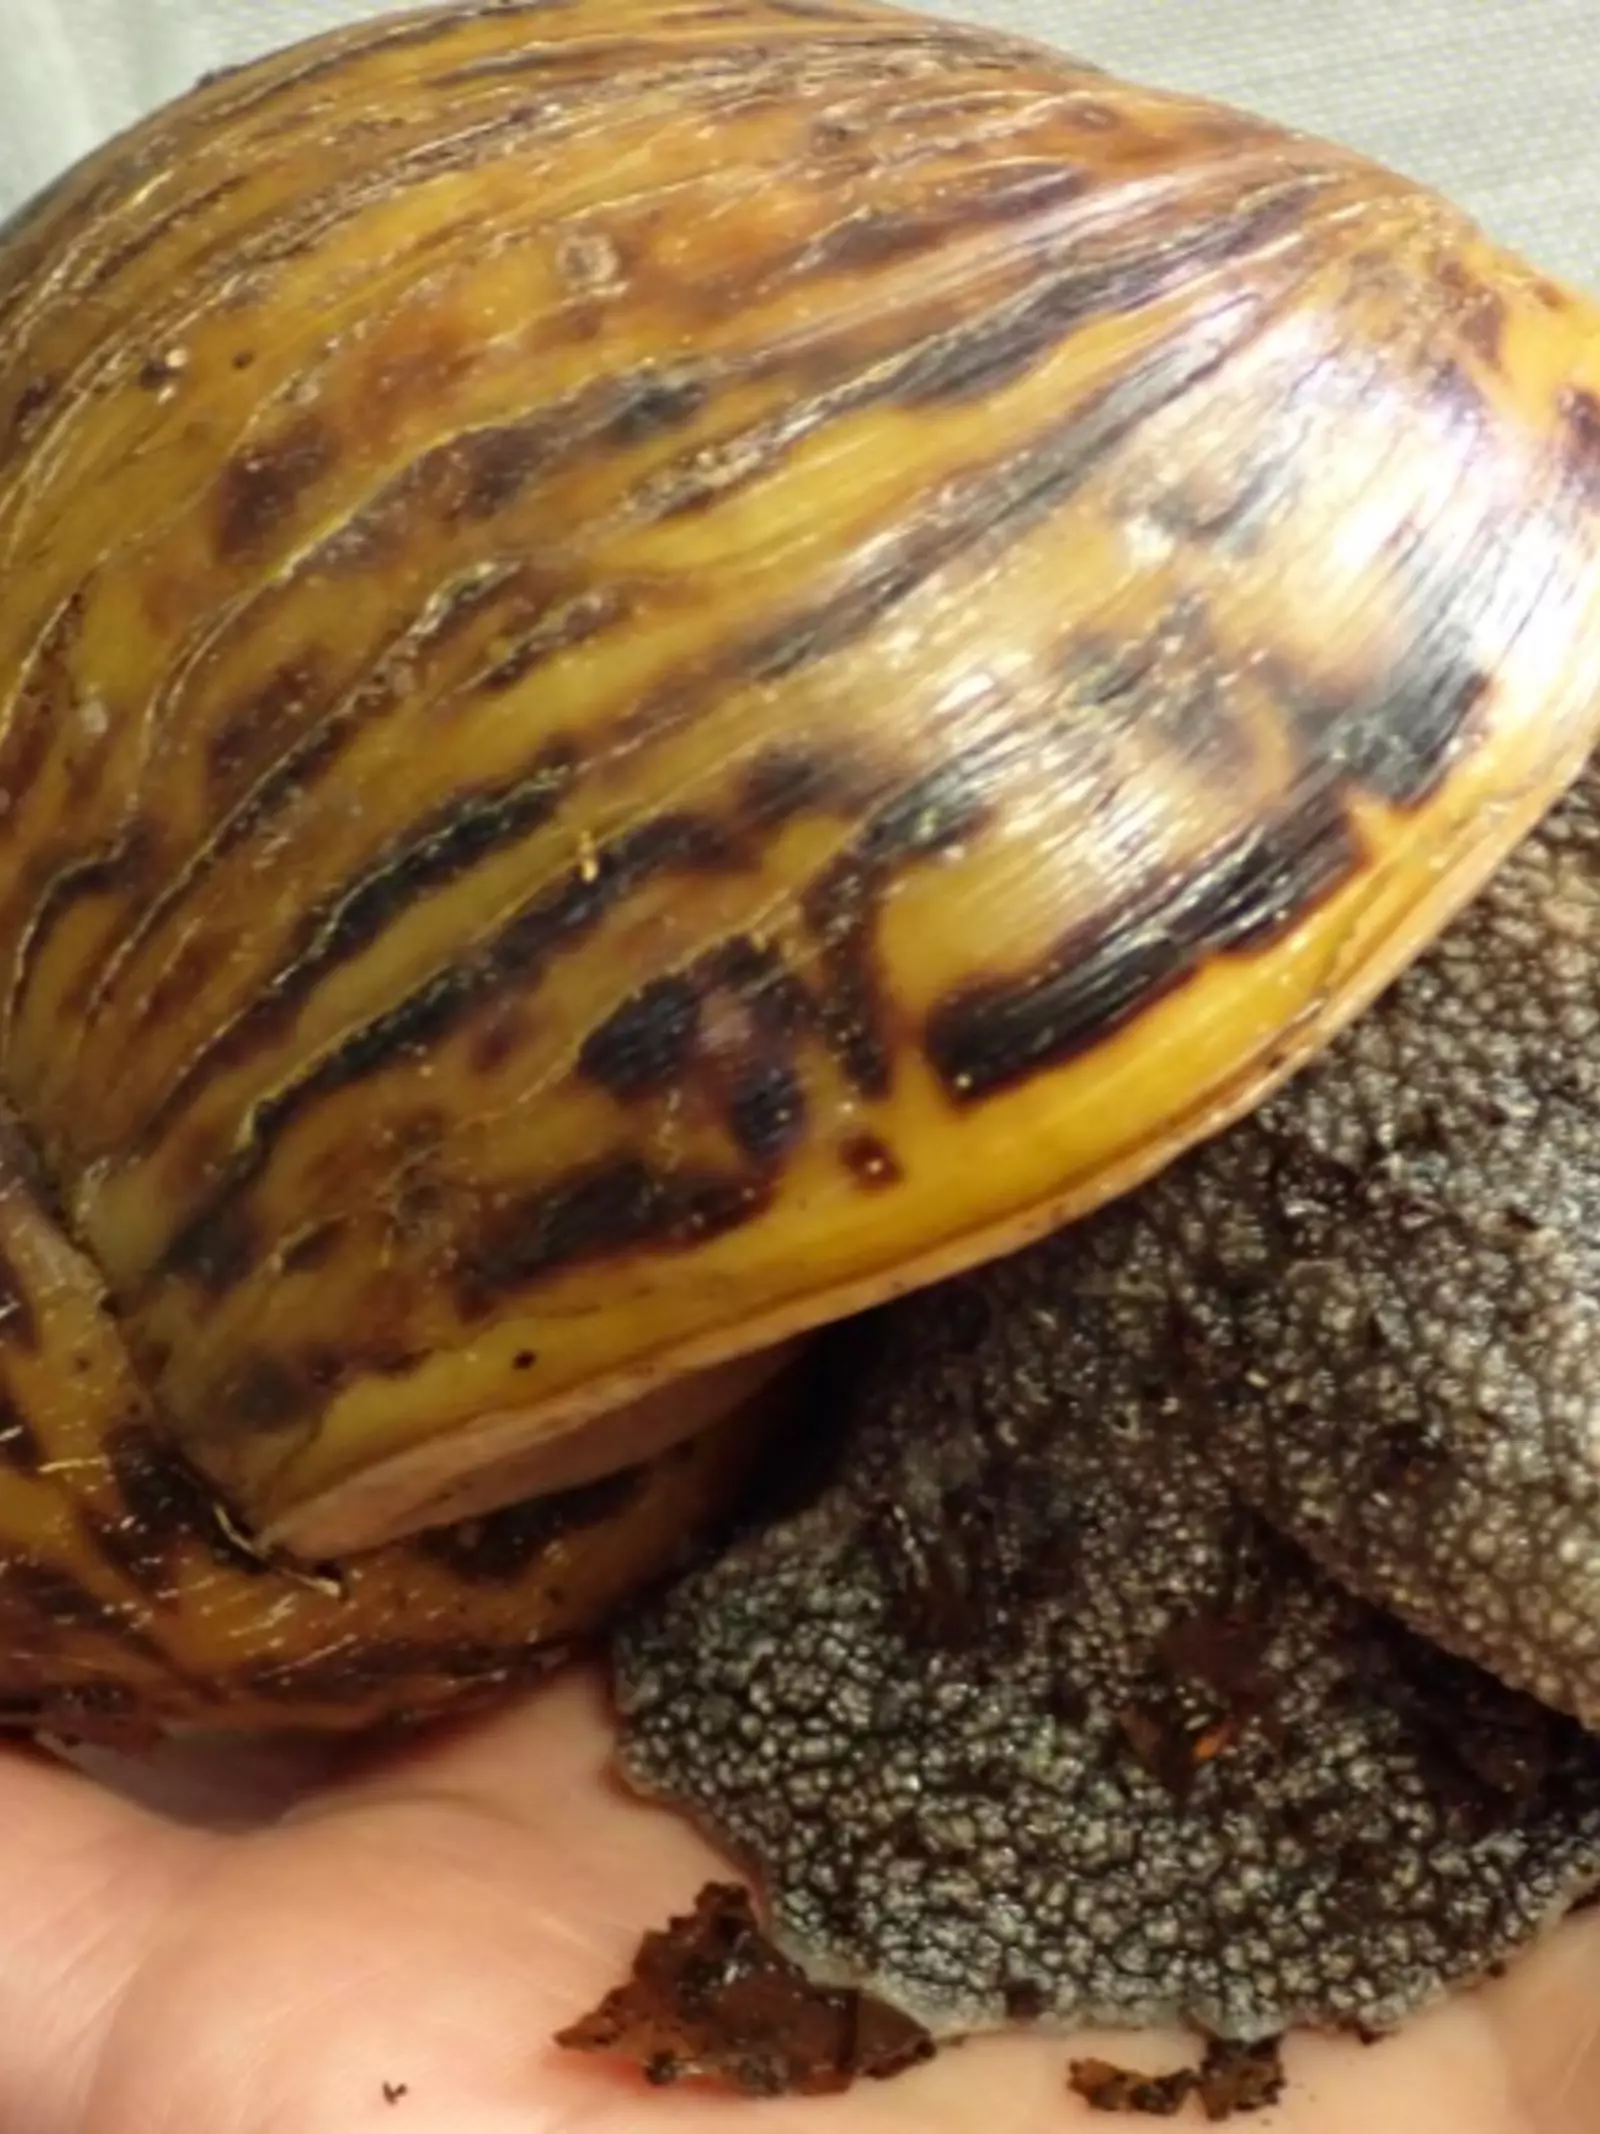 Giant African land snail on someone's hand